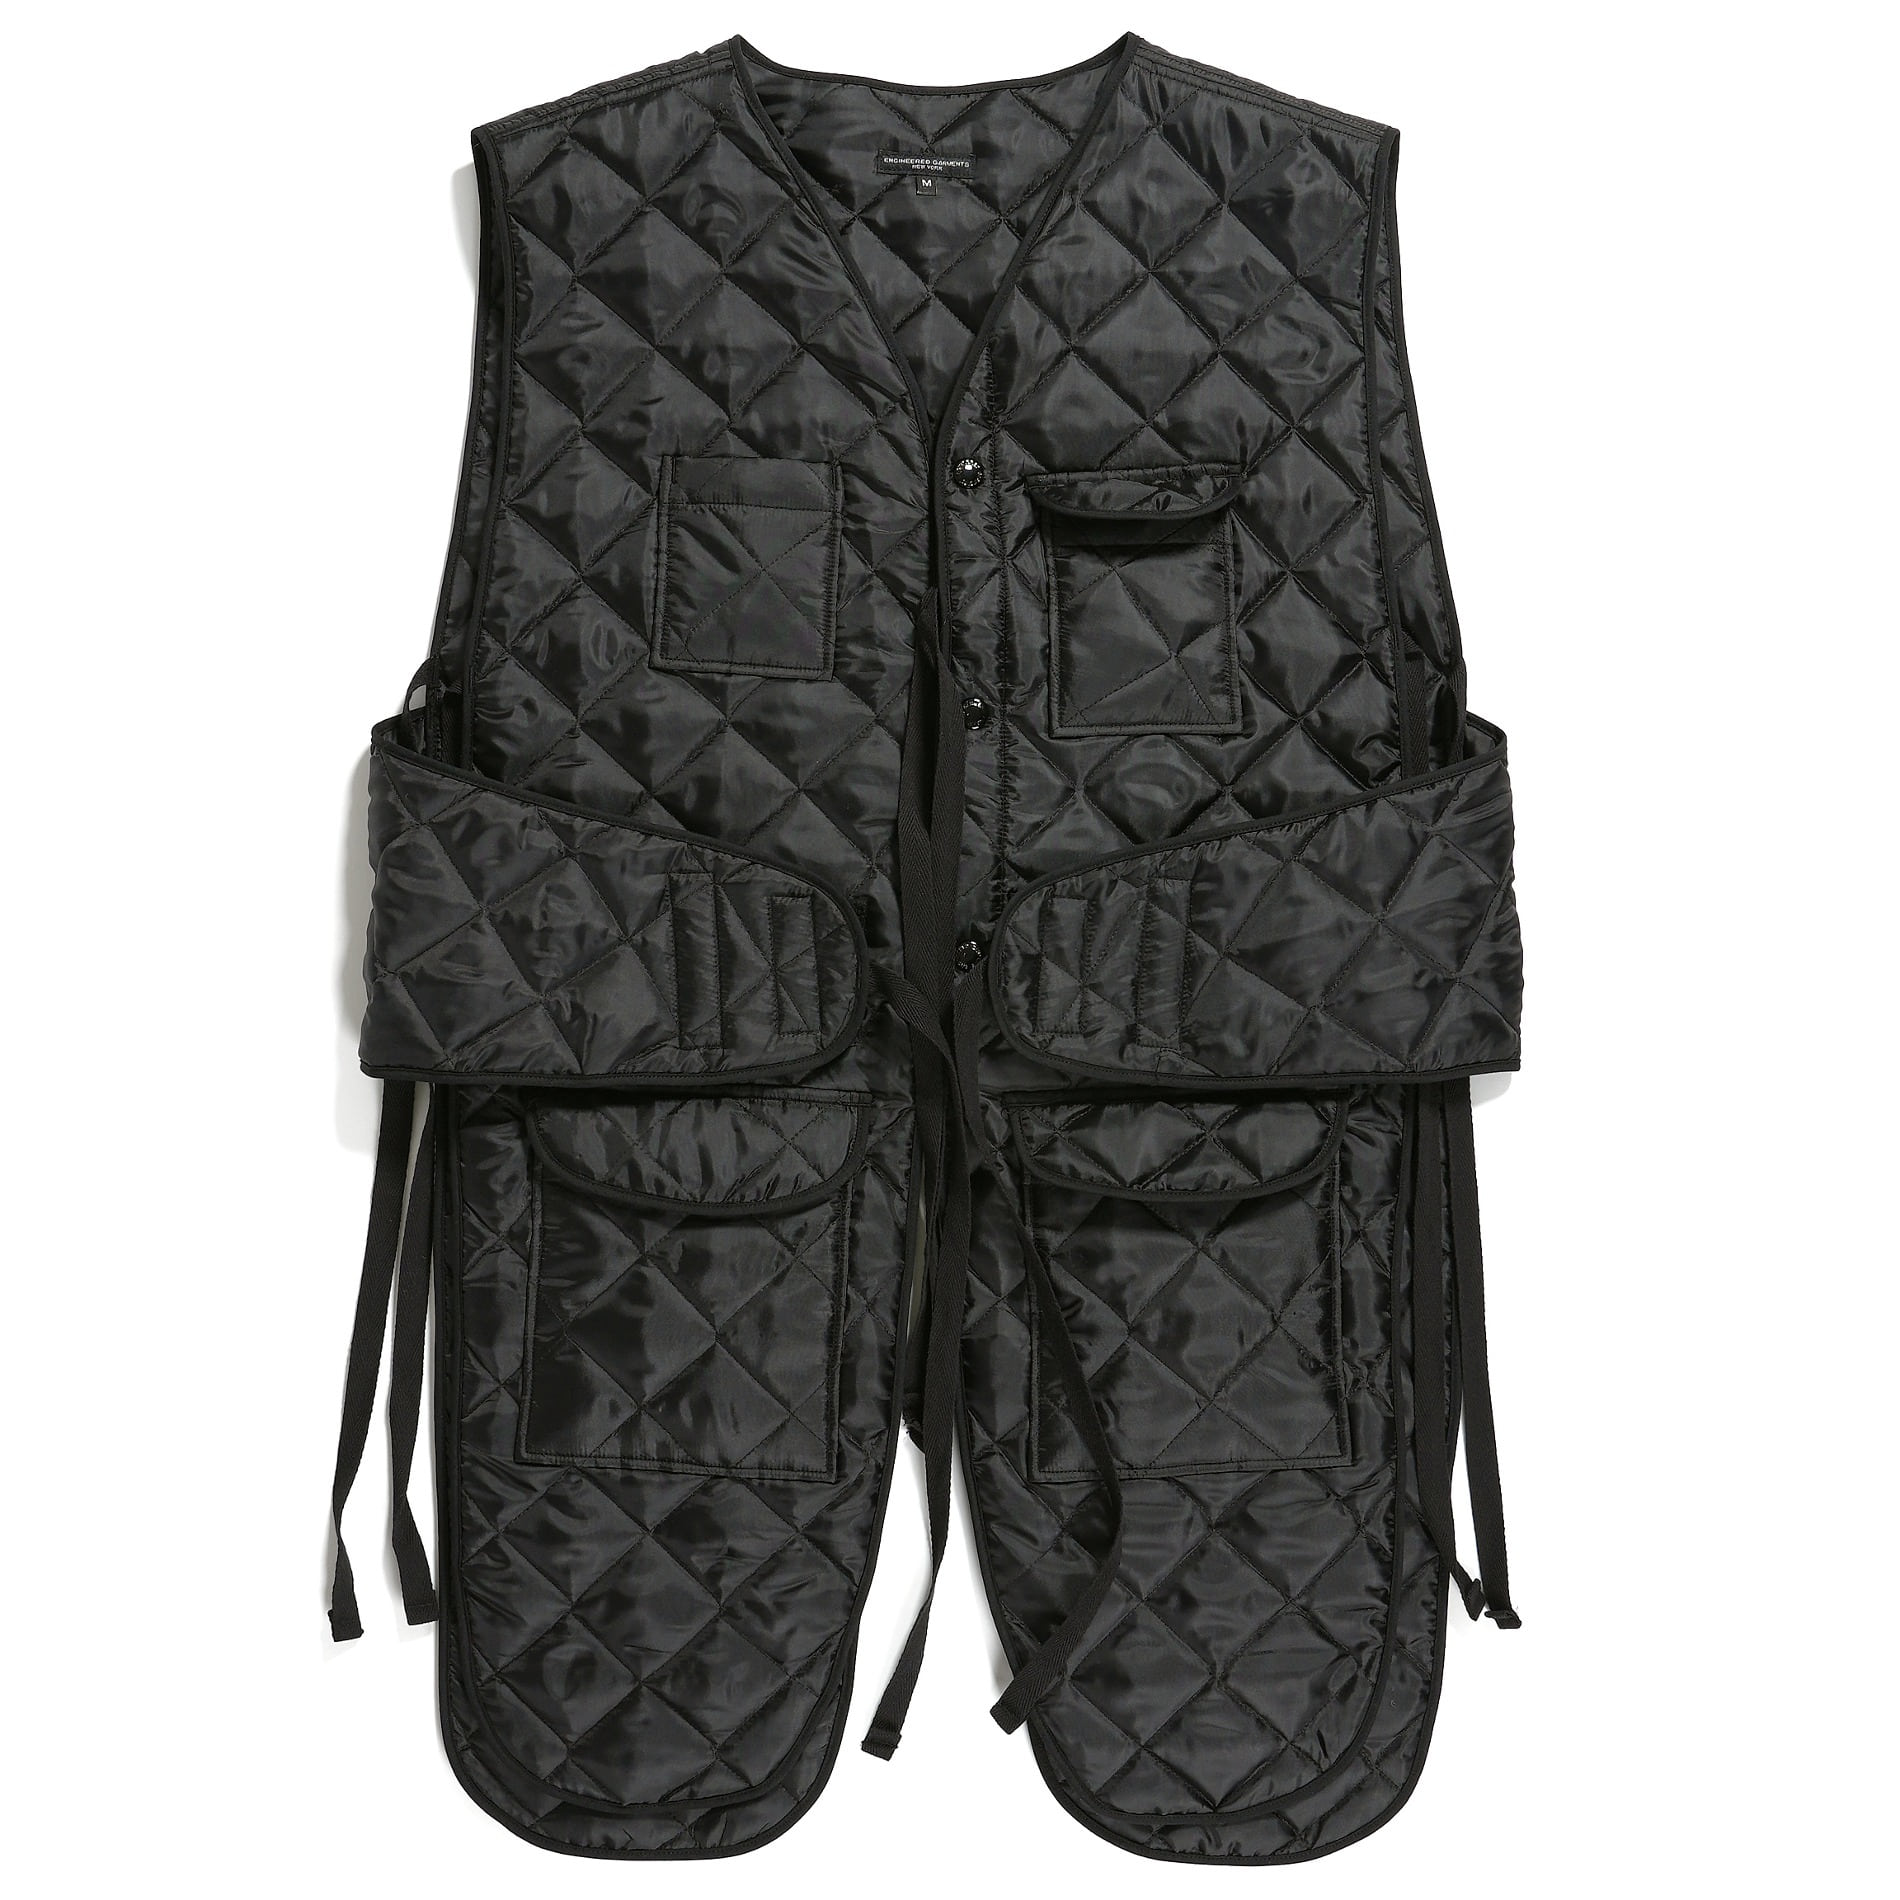 ENGINEERED GARMENTS LINER VEST BLACK DIAMOND QUILTED POLYESTER